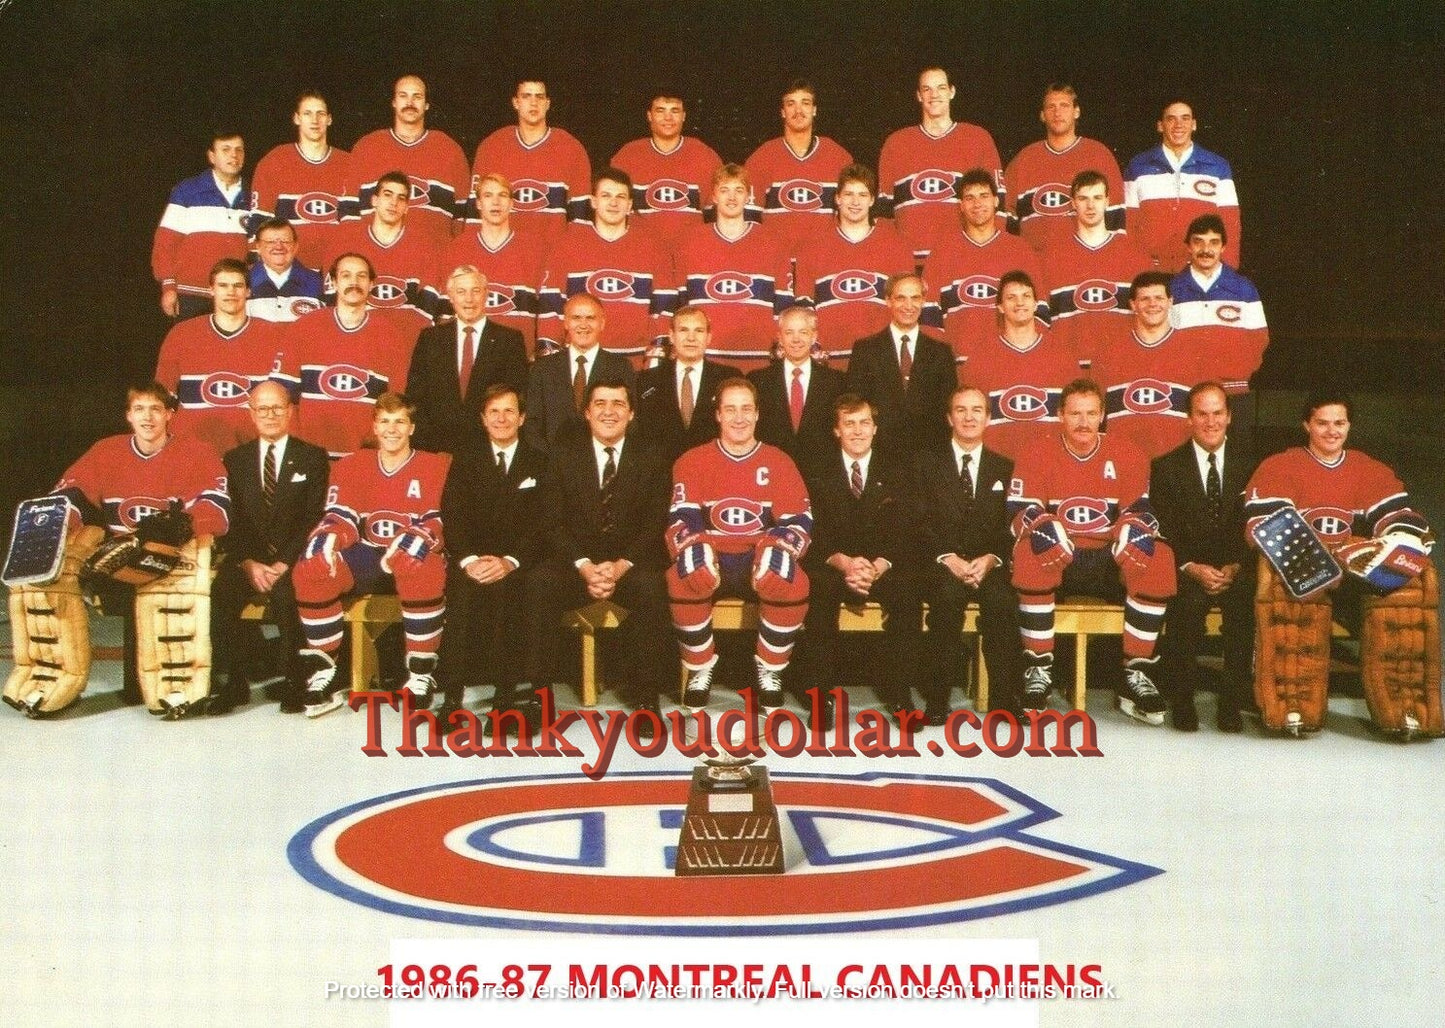 1986-87  MONTREAL CANADIANS TEAM PHOTO Glossy Print